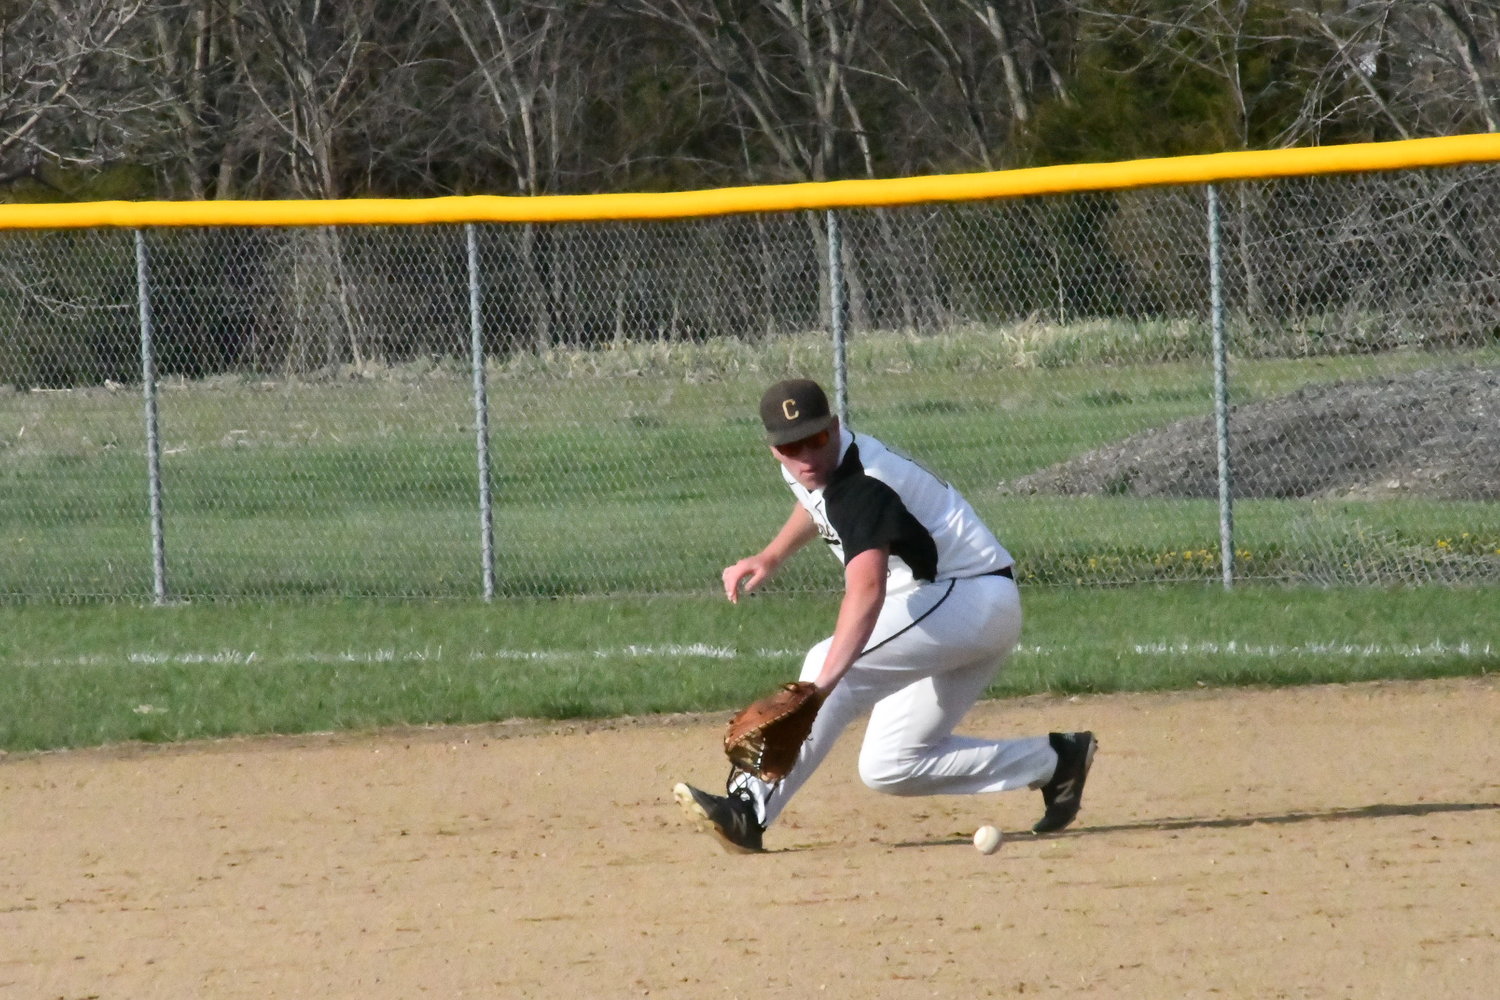 Cairo first baseman Tyler Davis makes a defensive play during Friday’s Randoph County showdown against Moberly. The Spartans nipped the Bearcats, 1-0.